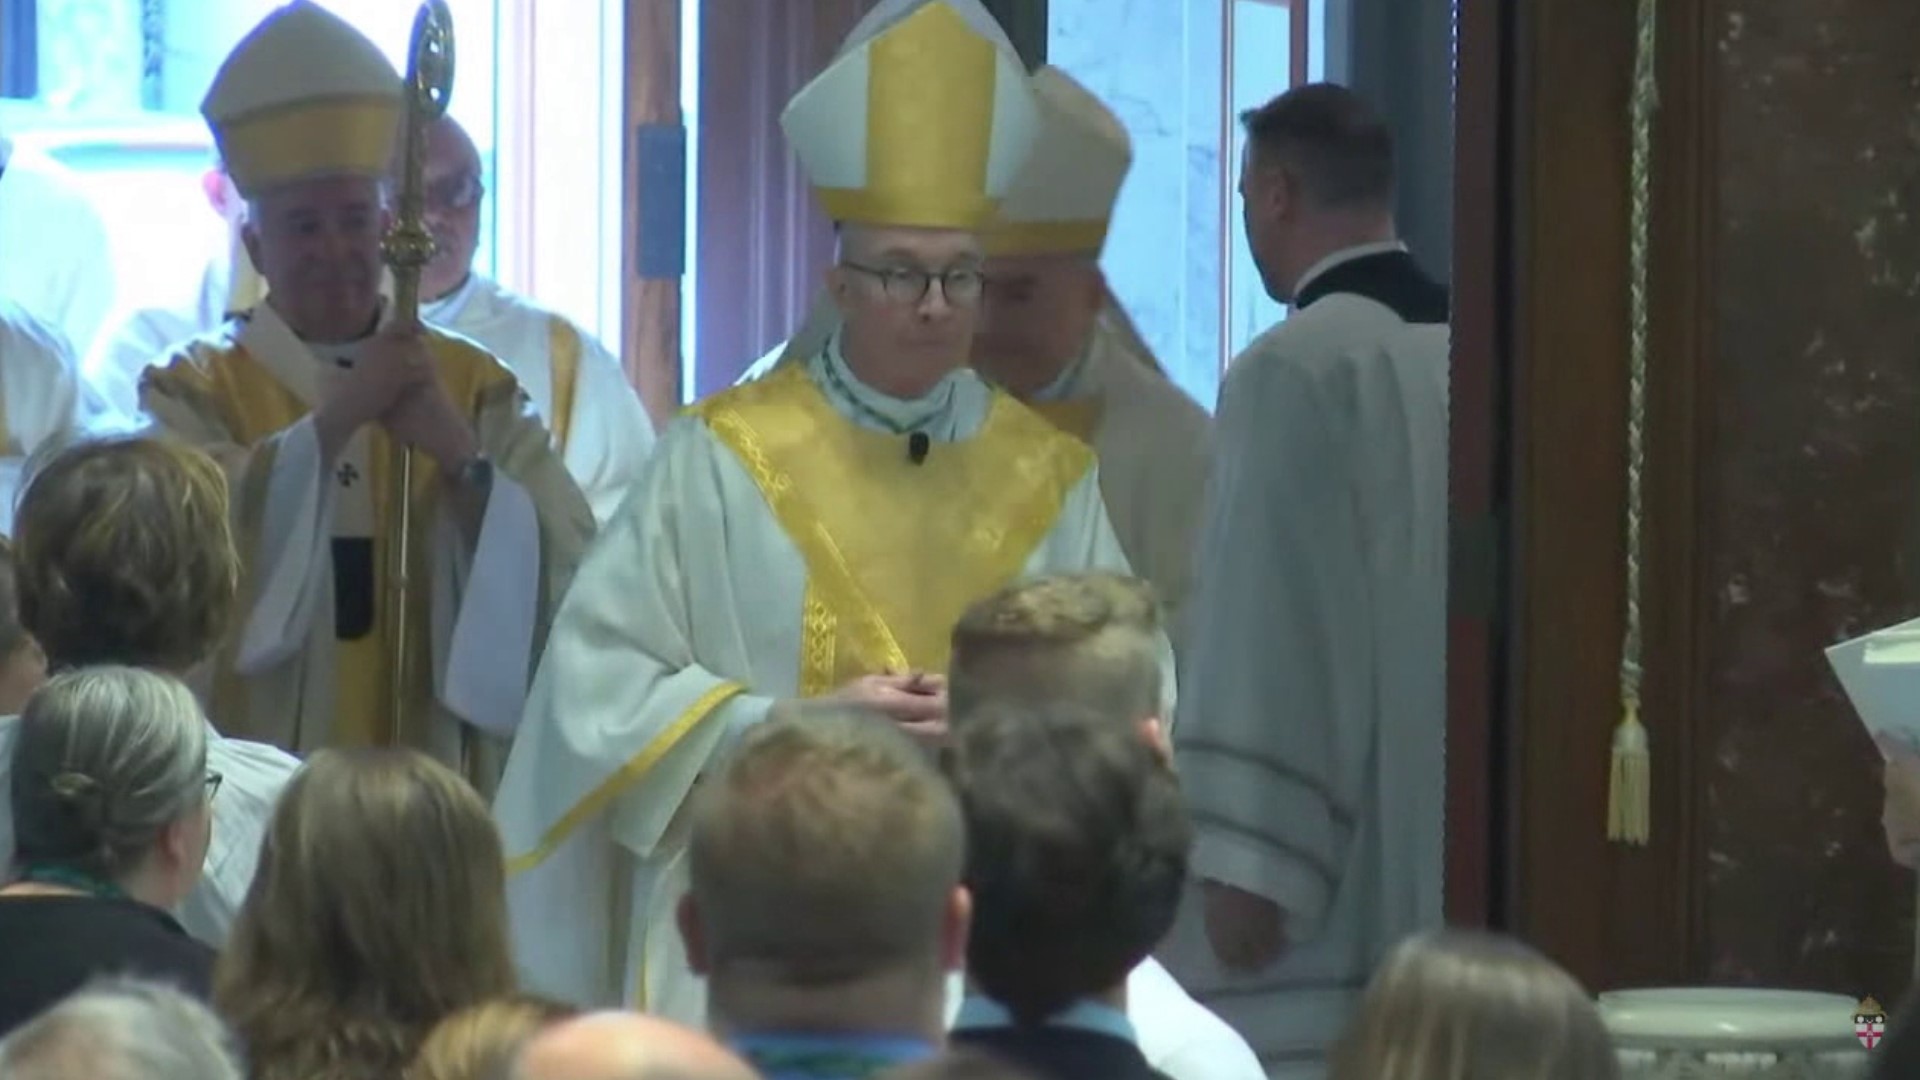 A historic day for Roman Catholics in Central Pennsylvania. Bishop Timothy Senior installed Wednesday as the new bishop of The Diocese of Harrisburg.